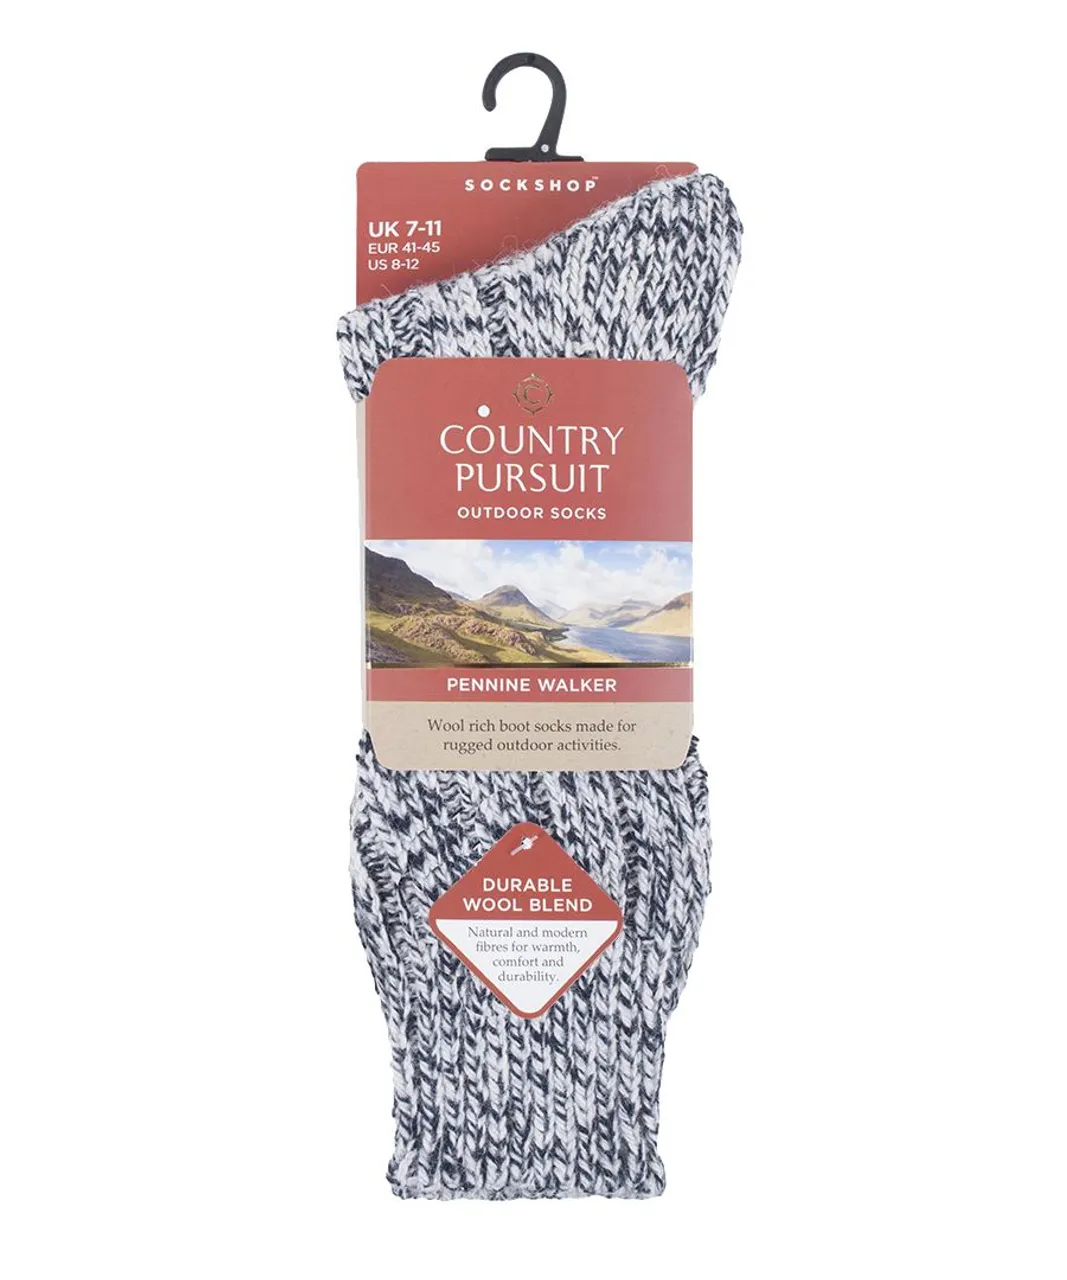 Country Pursuit PENNINE WALKER - Mens Heavy Kntted Wool Hiking Socks for Walking - Cream